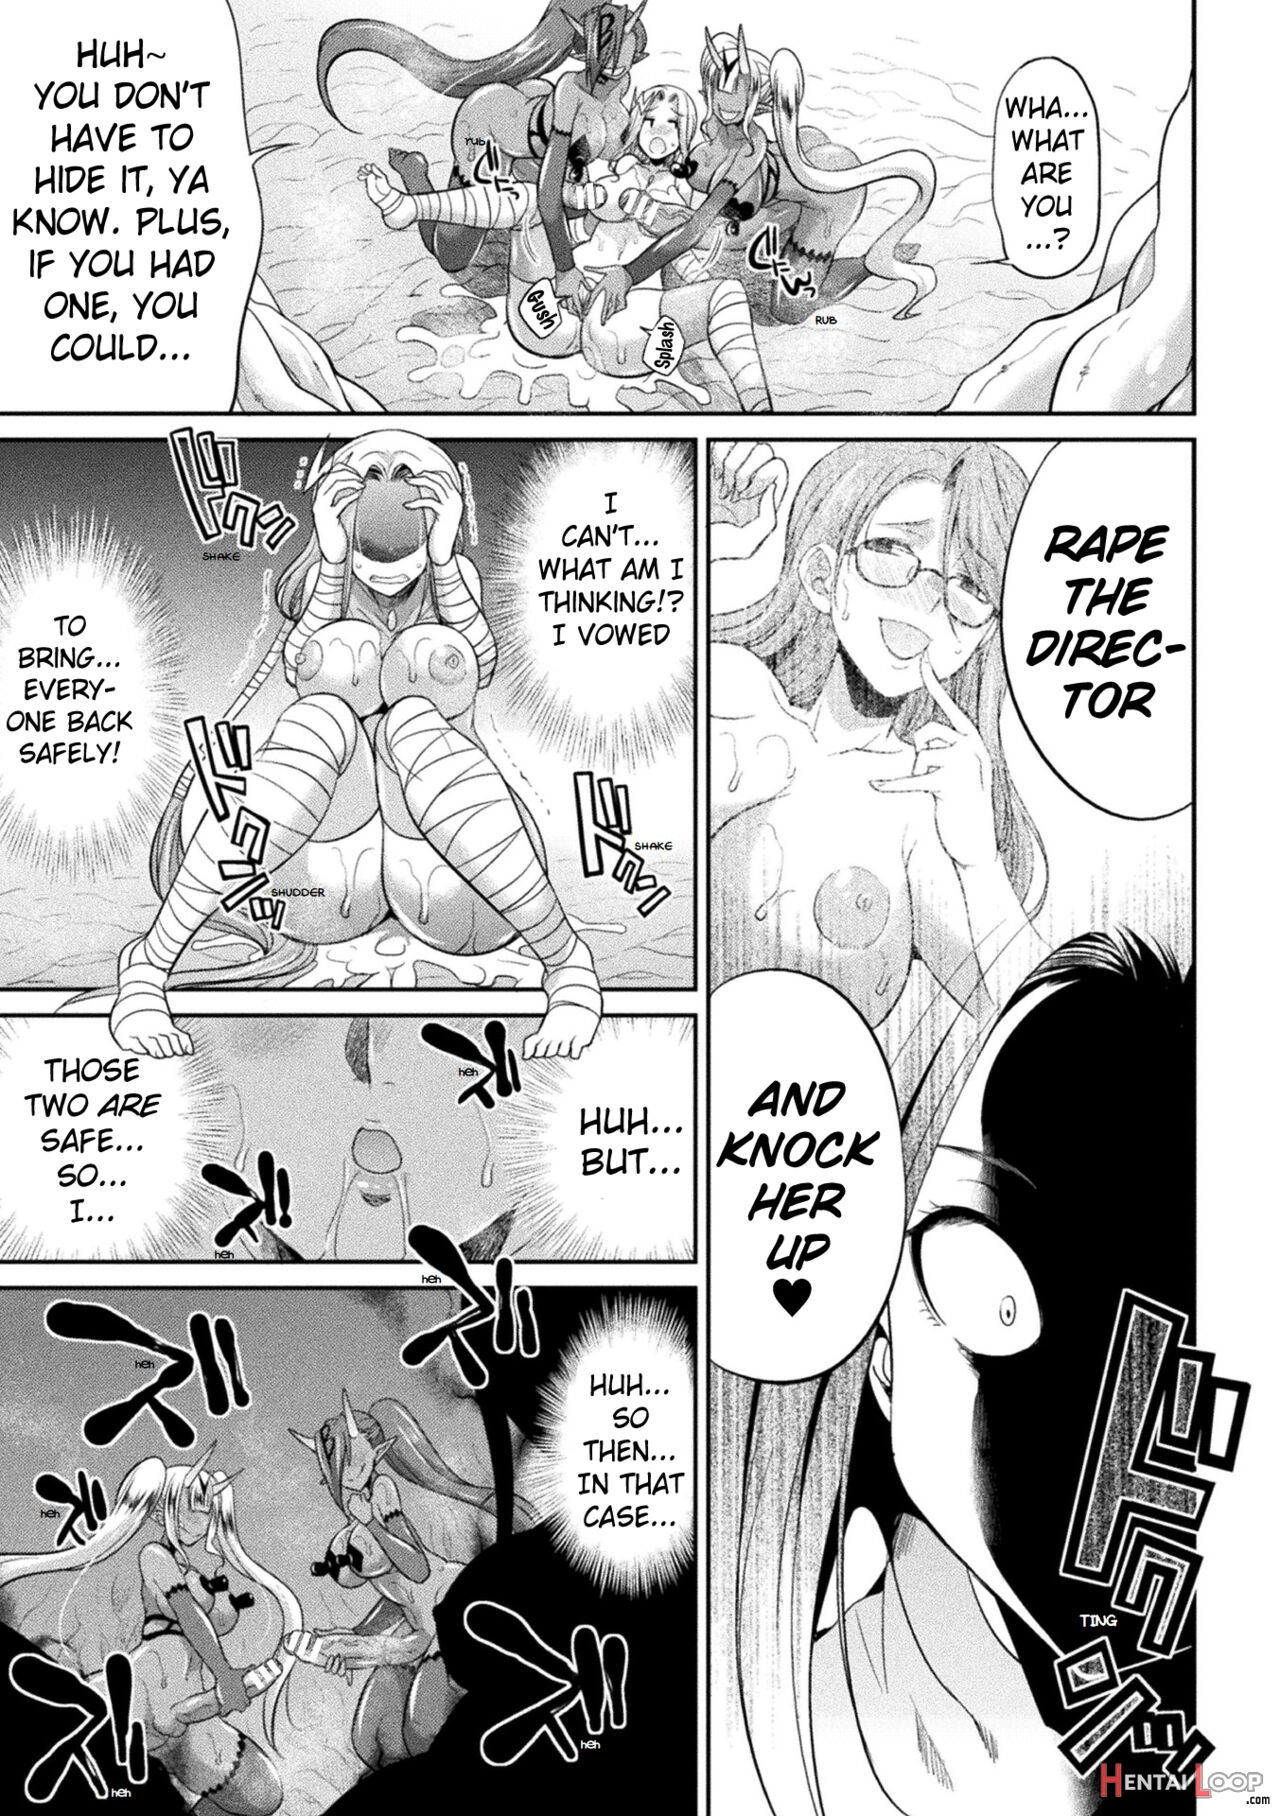 Special Duty Squadron Colorful Force Heroines Of Justice Vs The Tentacle Queen! The Great Battle Of Futa Training!? page 115